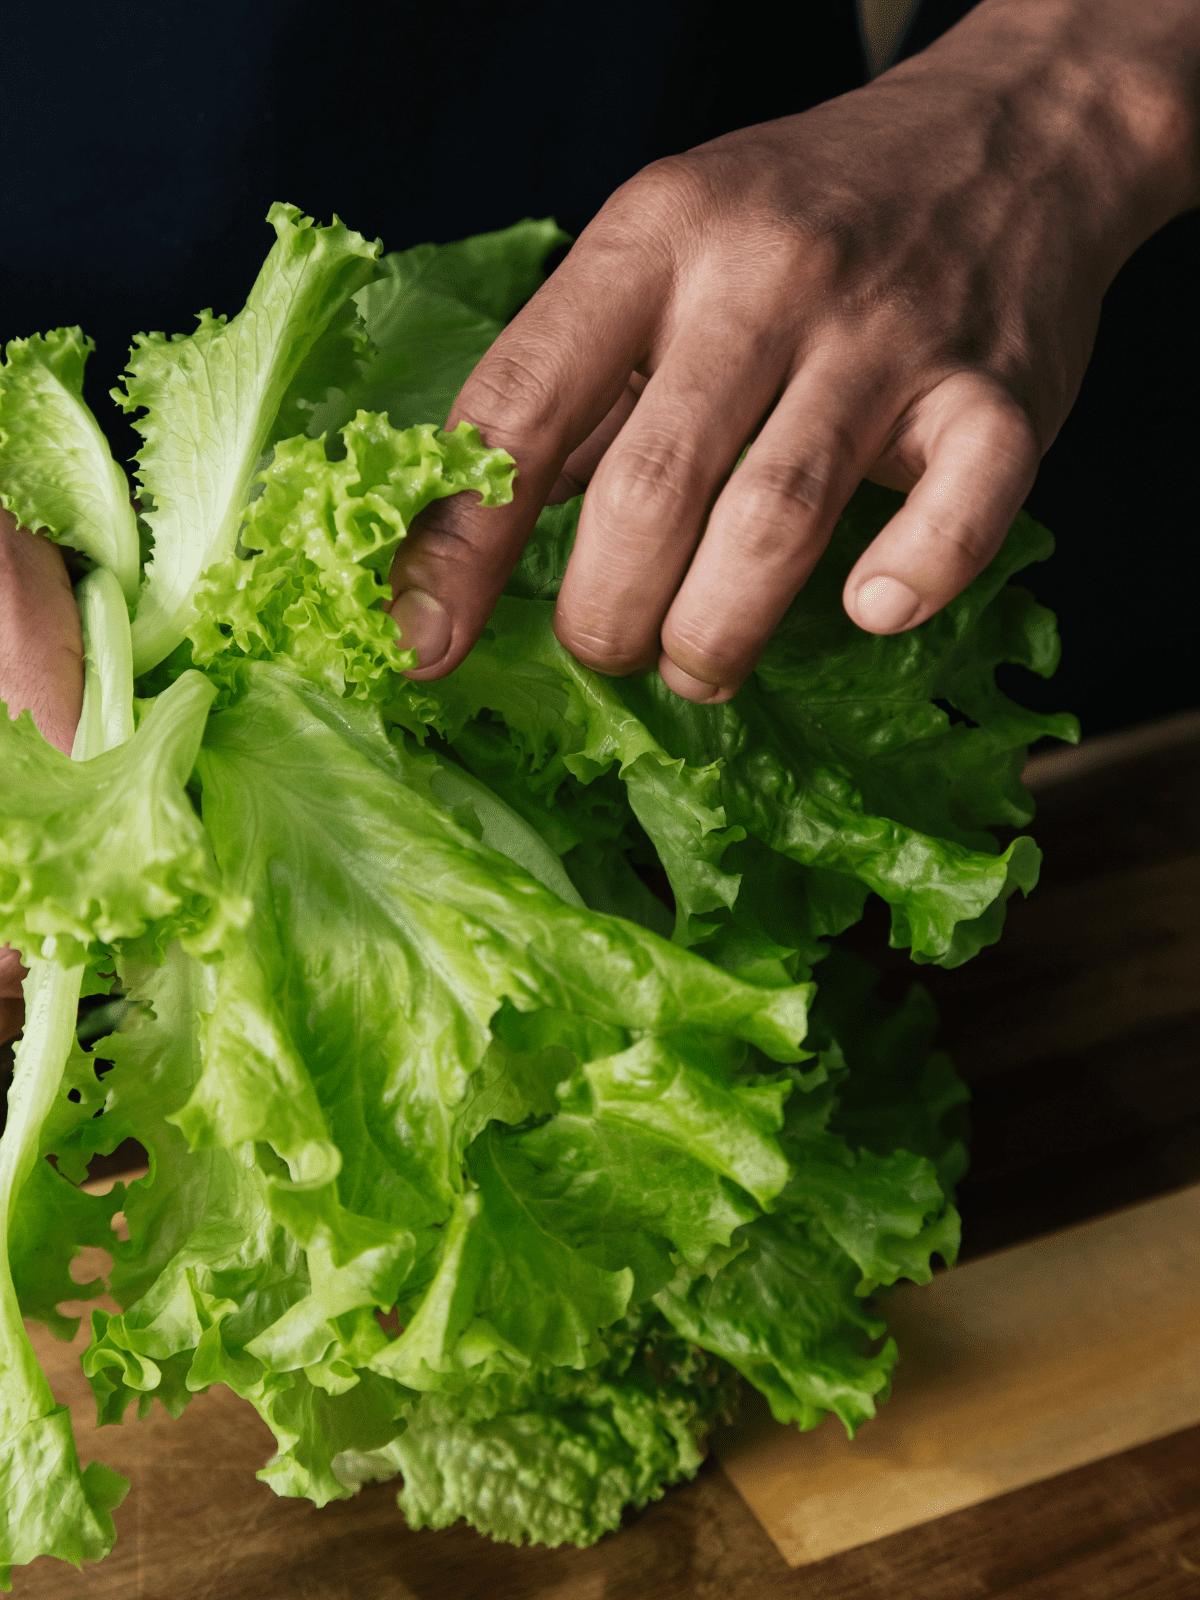 Hand holding lettuce to chop on a cutting board.